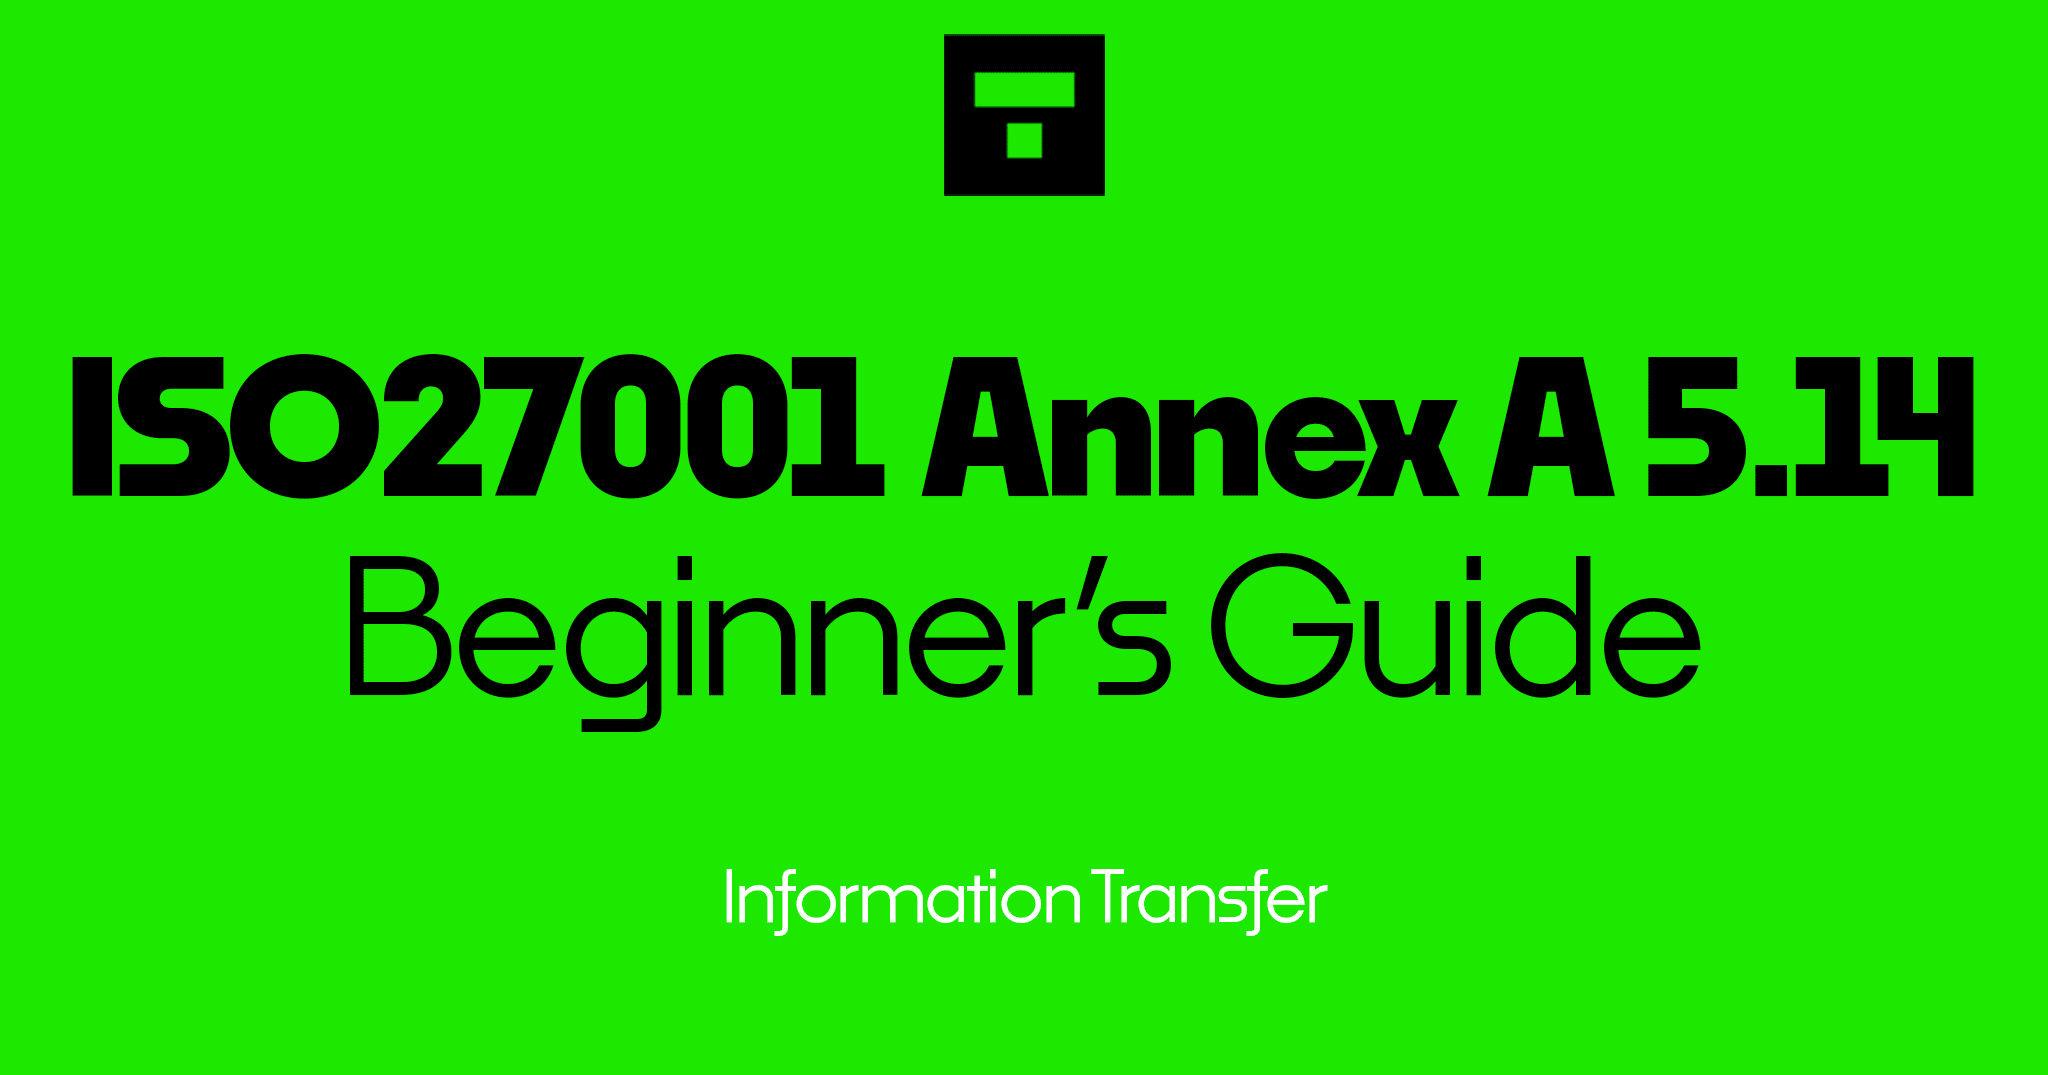 How To Implement ISO 27001 Annex A 5.14 Information Transfer